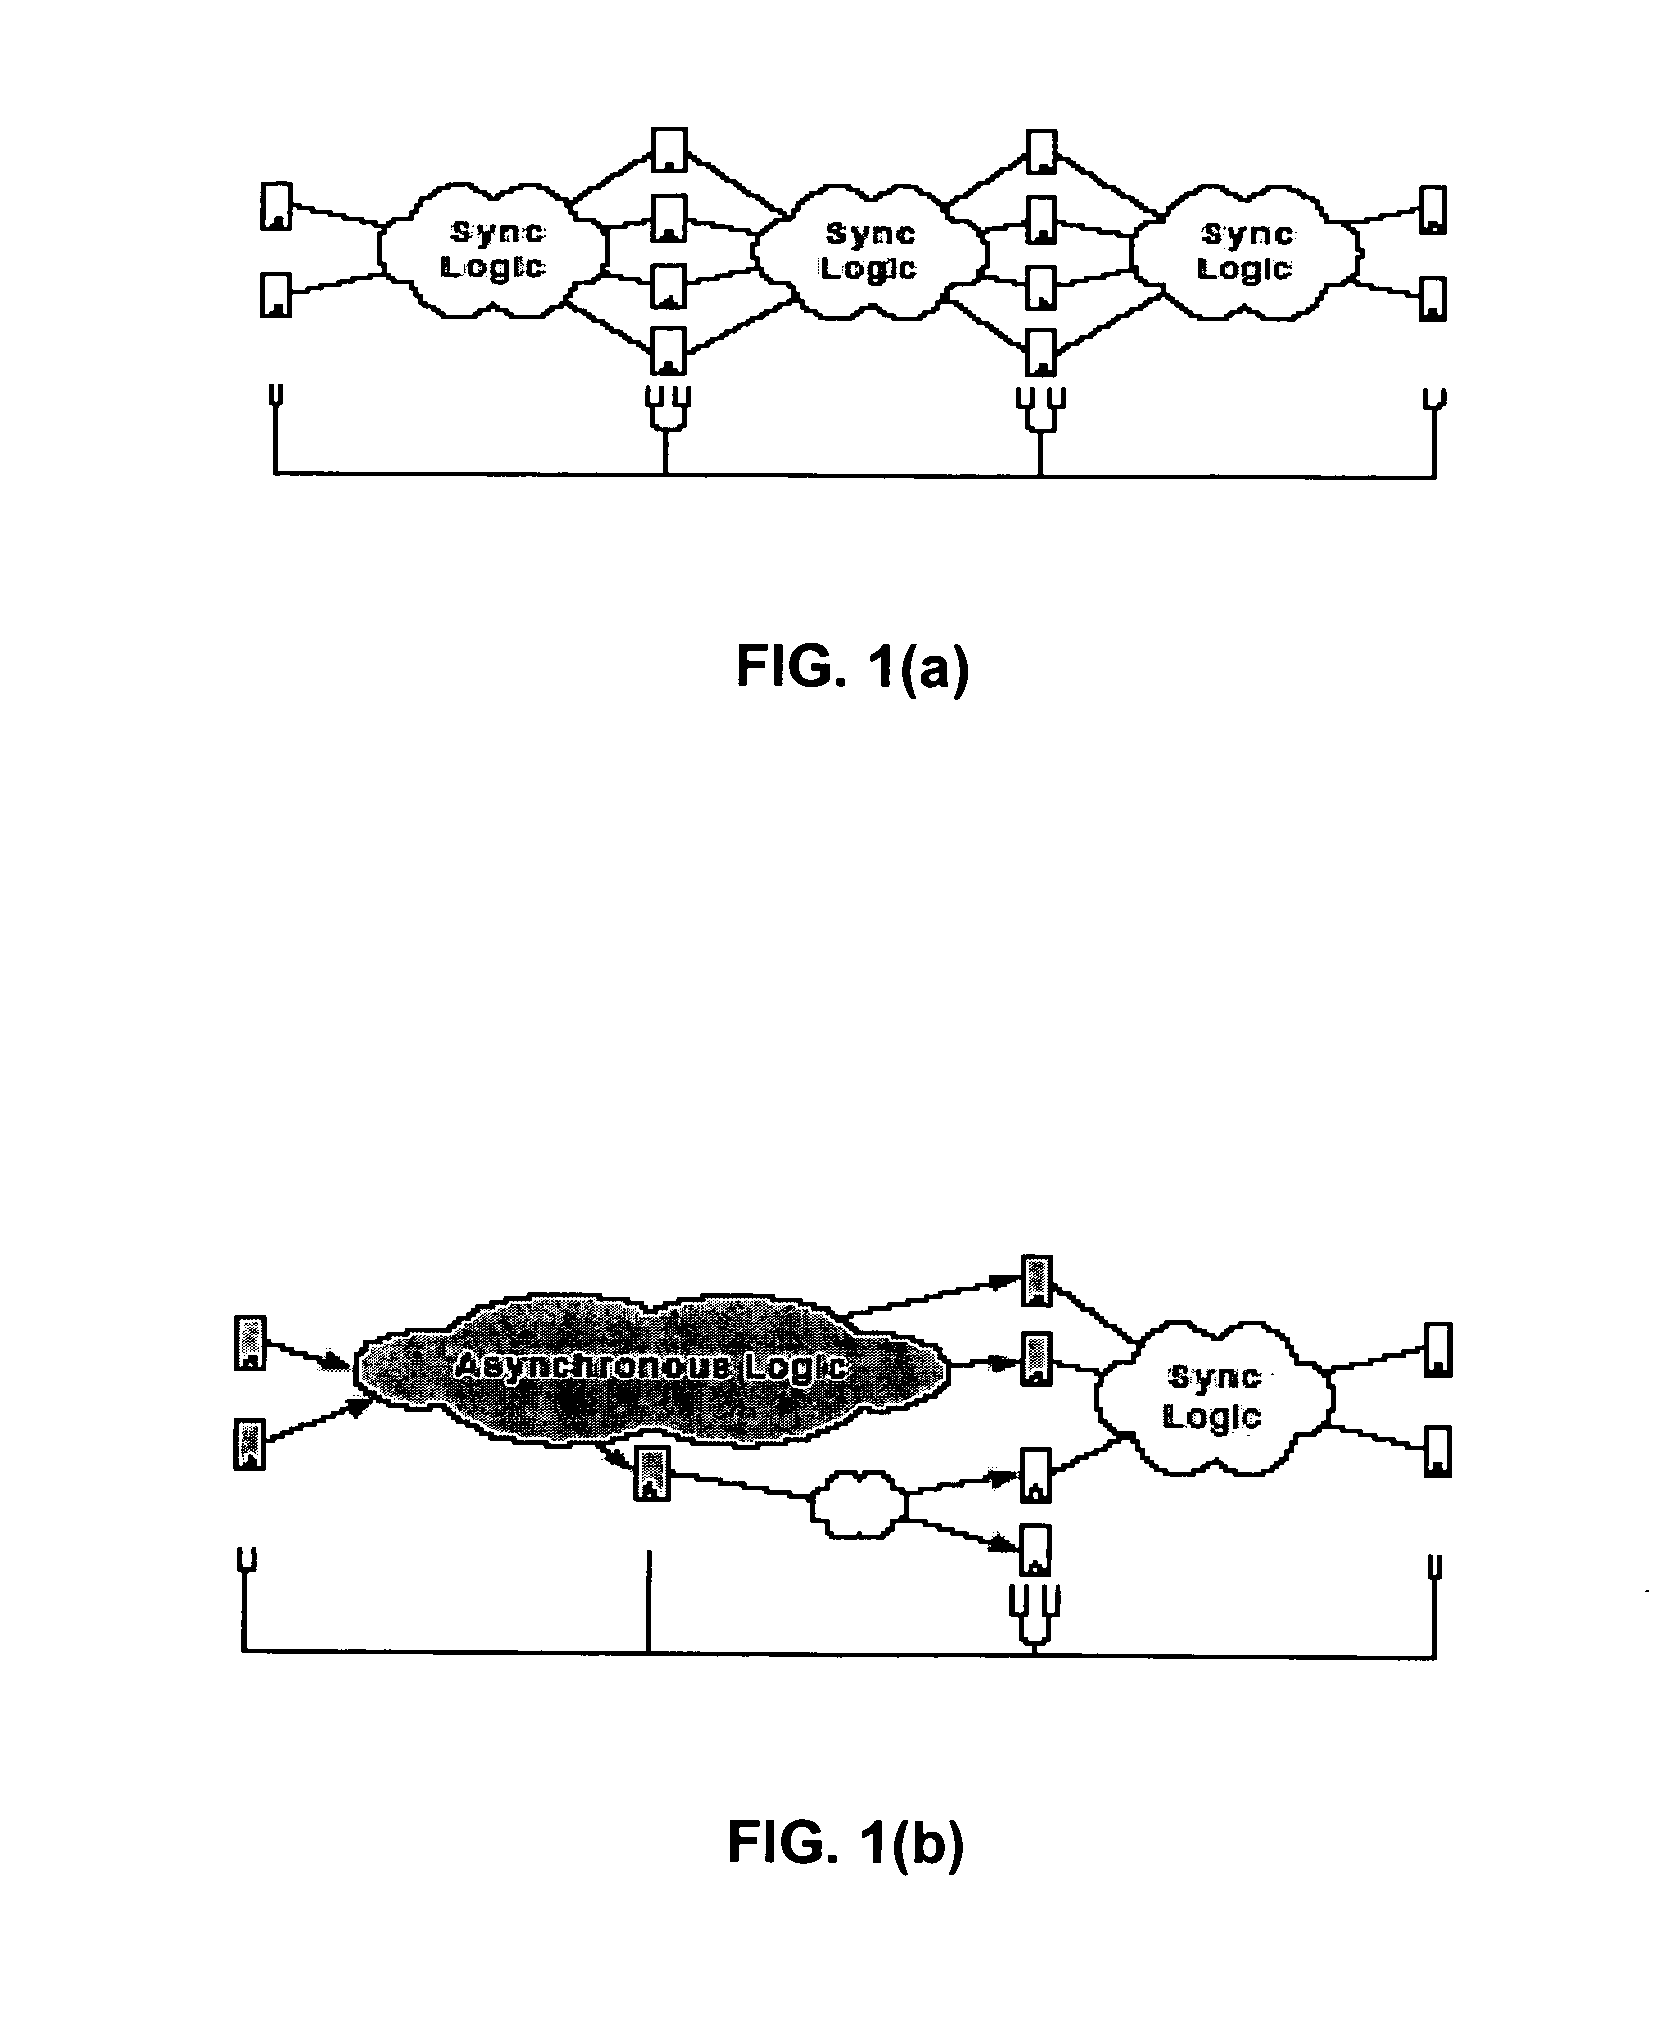 Logic synthesis of multi-level domino asynchronous pipelines